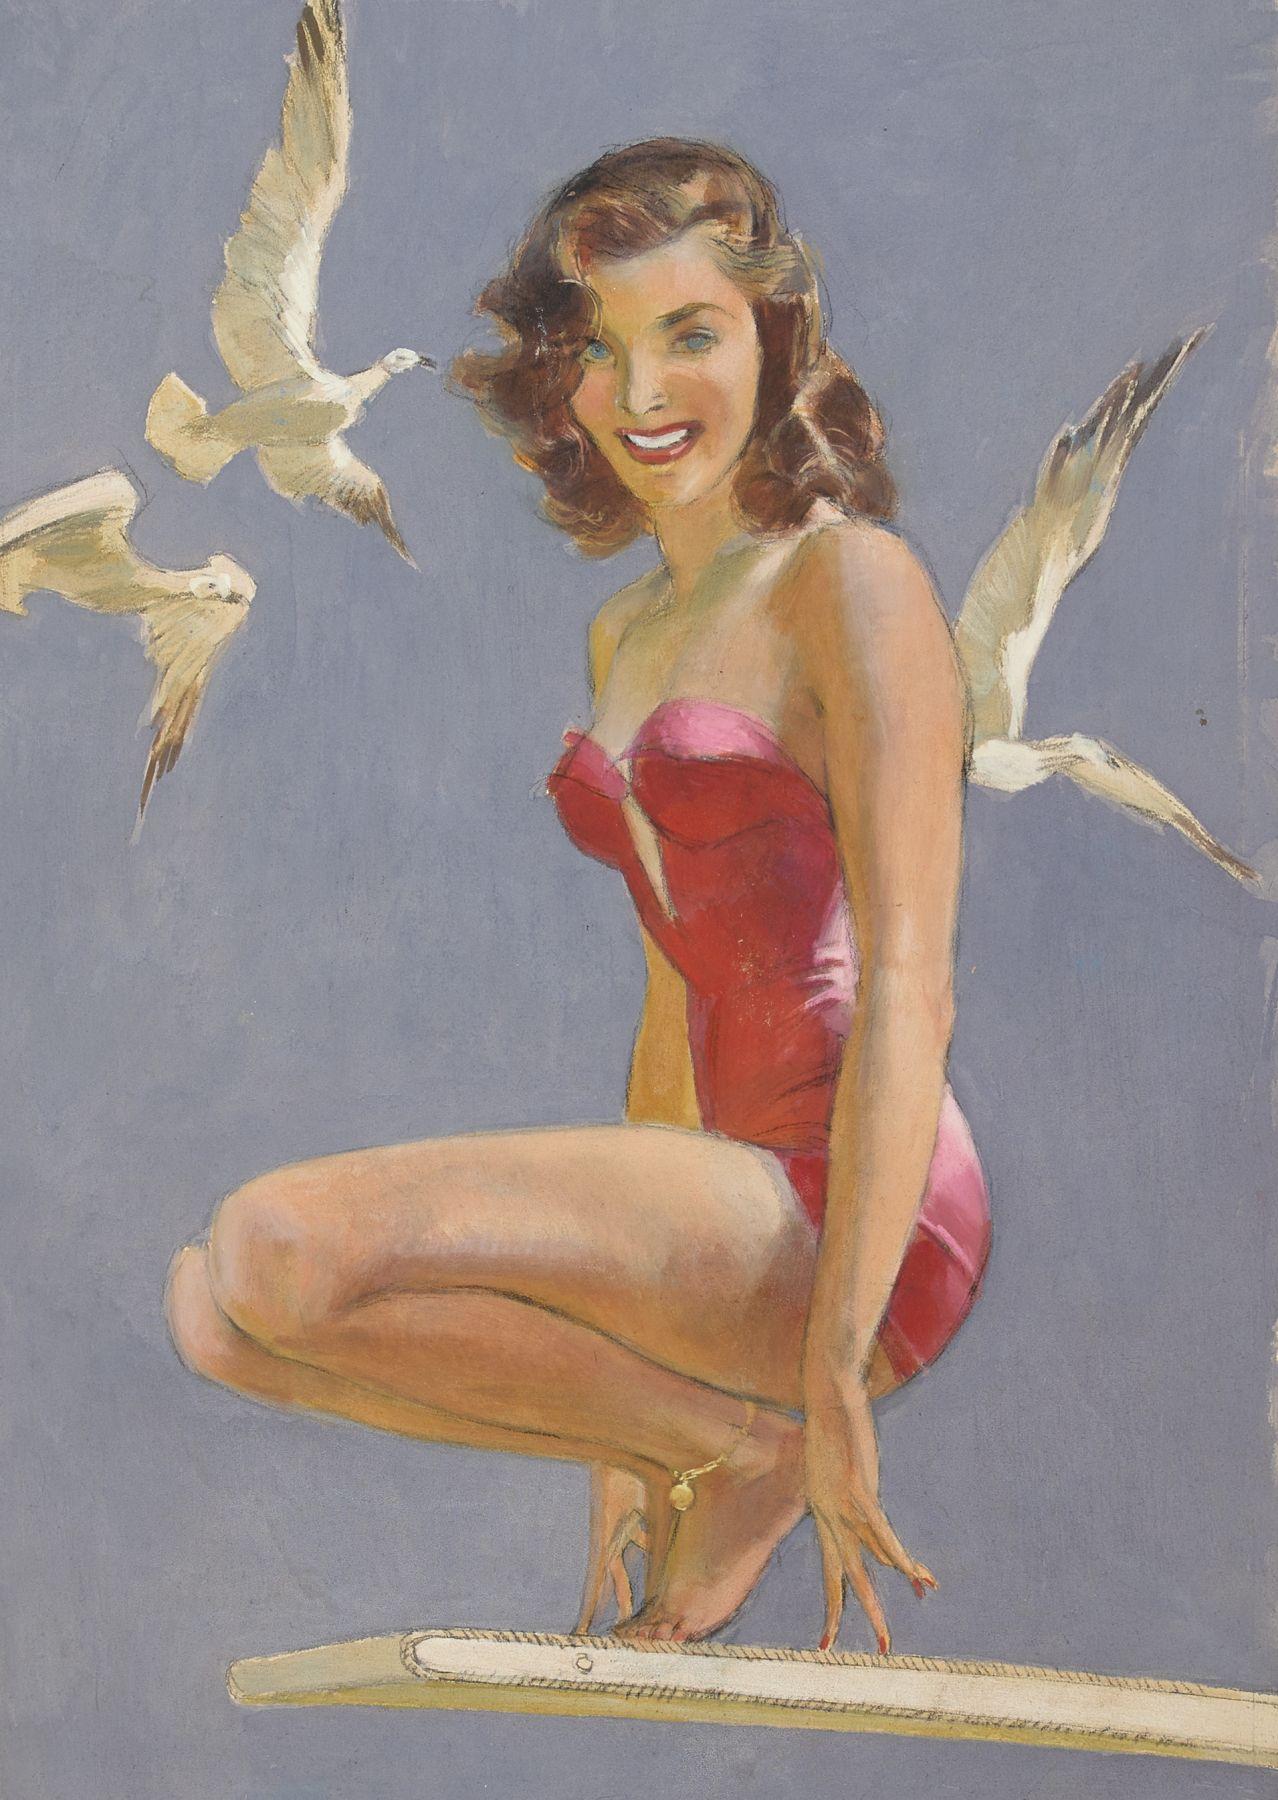 John Lagatta Figurative Art - Woman in Red Swimsuit Perched on Diving Board, Three White Doves Around Her